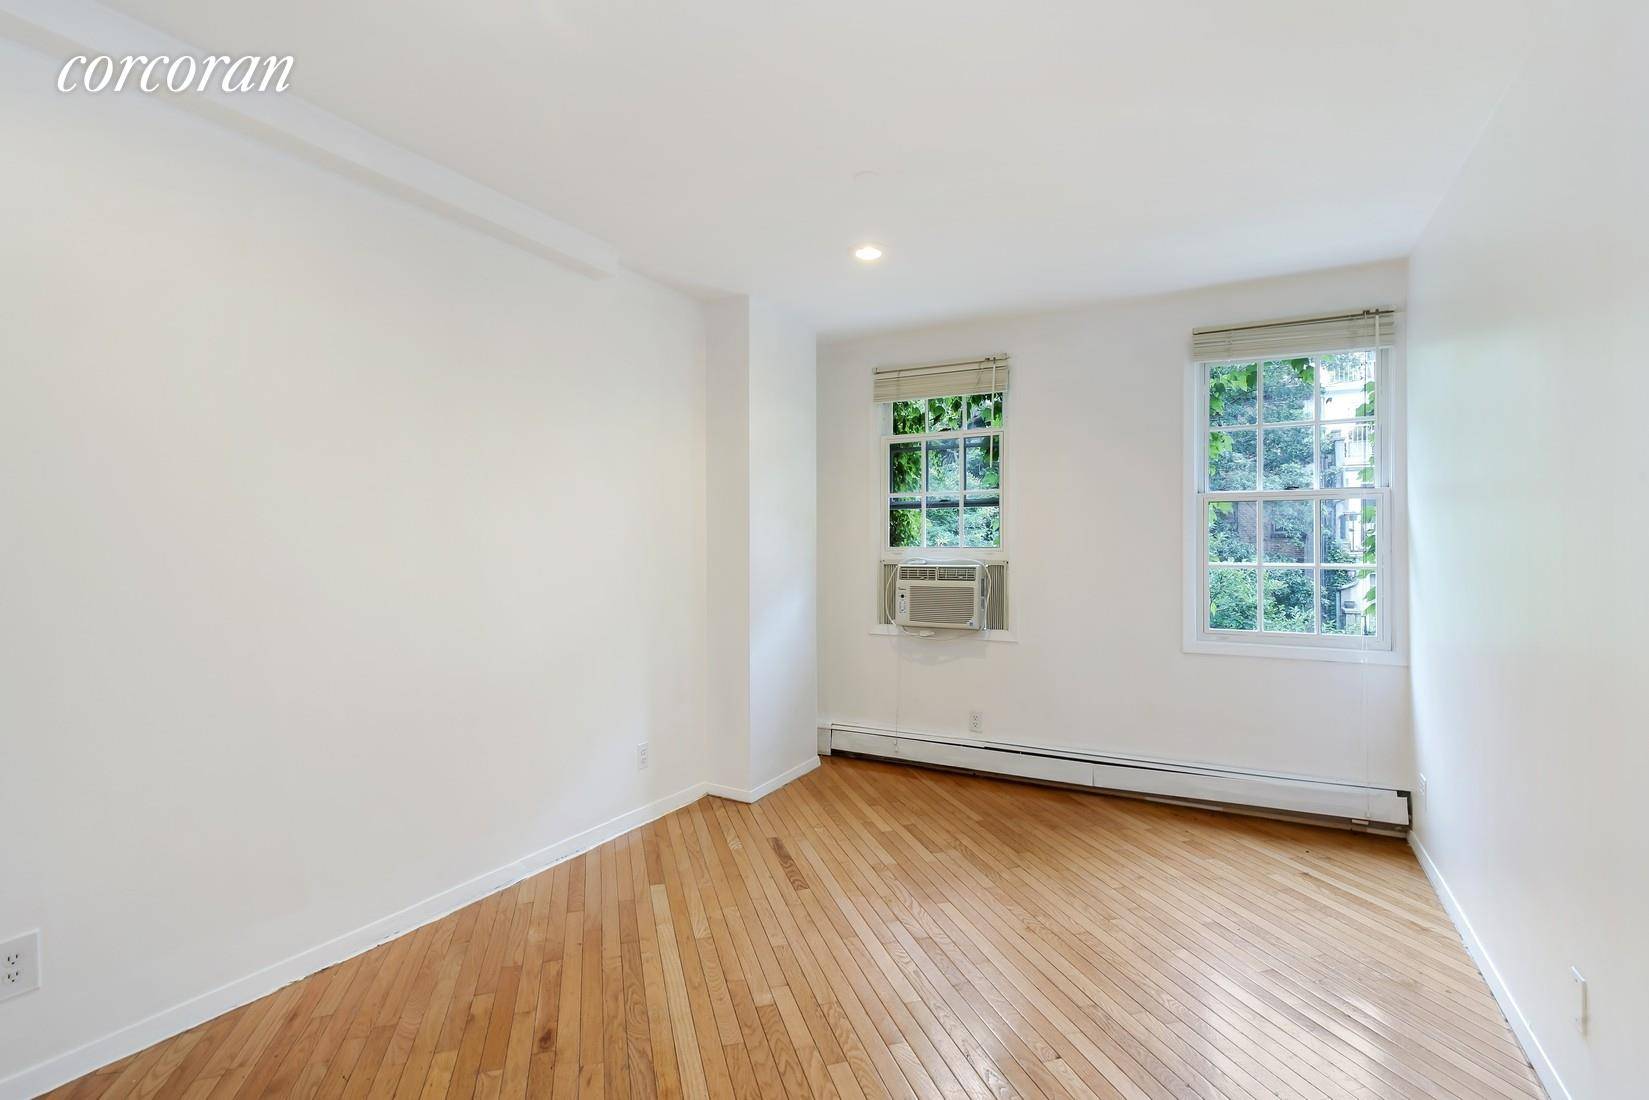 Light filled one bedroom on the third floor of a beautiful townhouse, only a block equidistant to Fairway Market or Trader Joes.